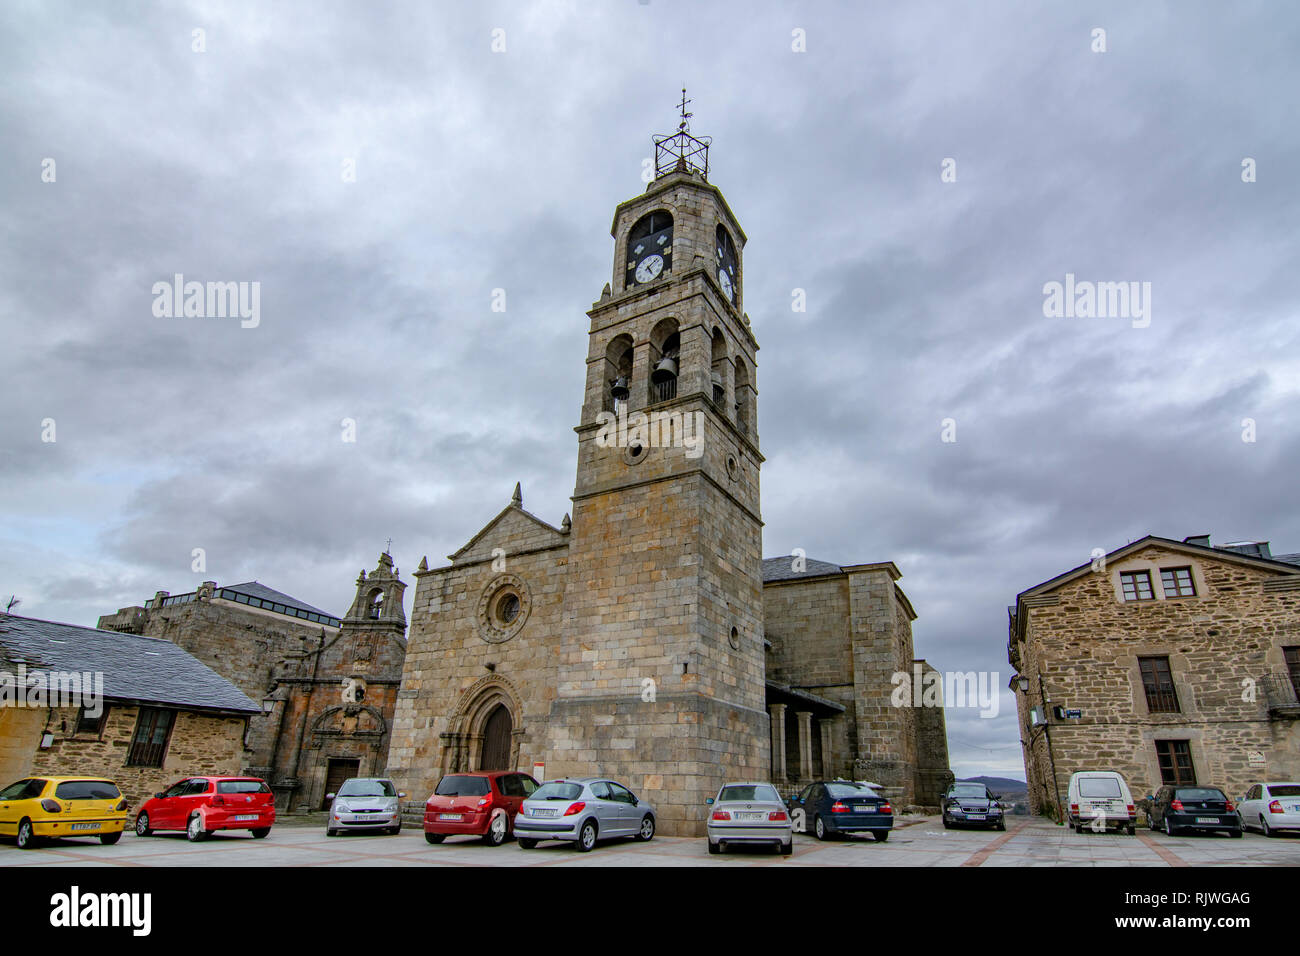 Puebla de Sanabria, Zamora, Spain; January 2017: This is the church called Our lady of Azogue in the village of Puebla de Sanabria in the province of  Stock Photo